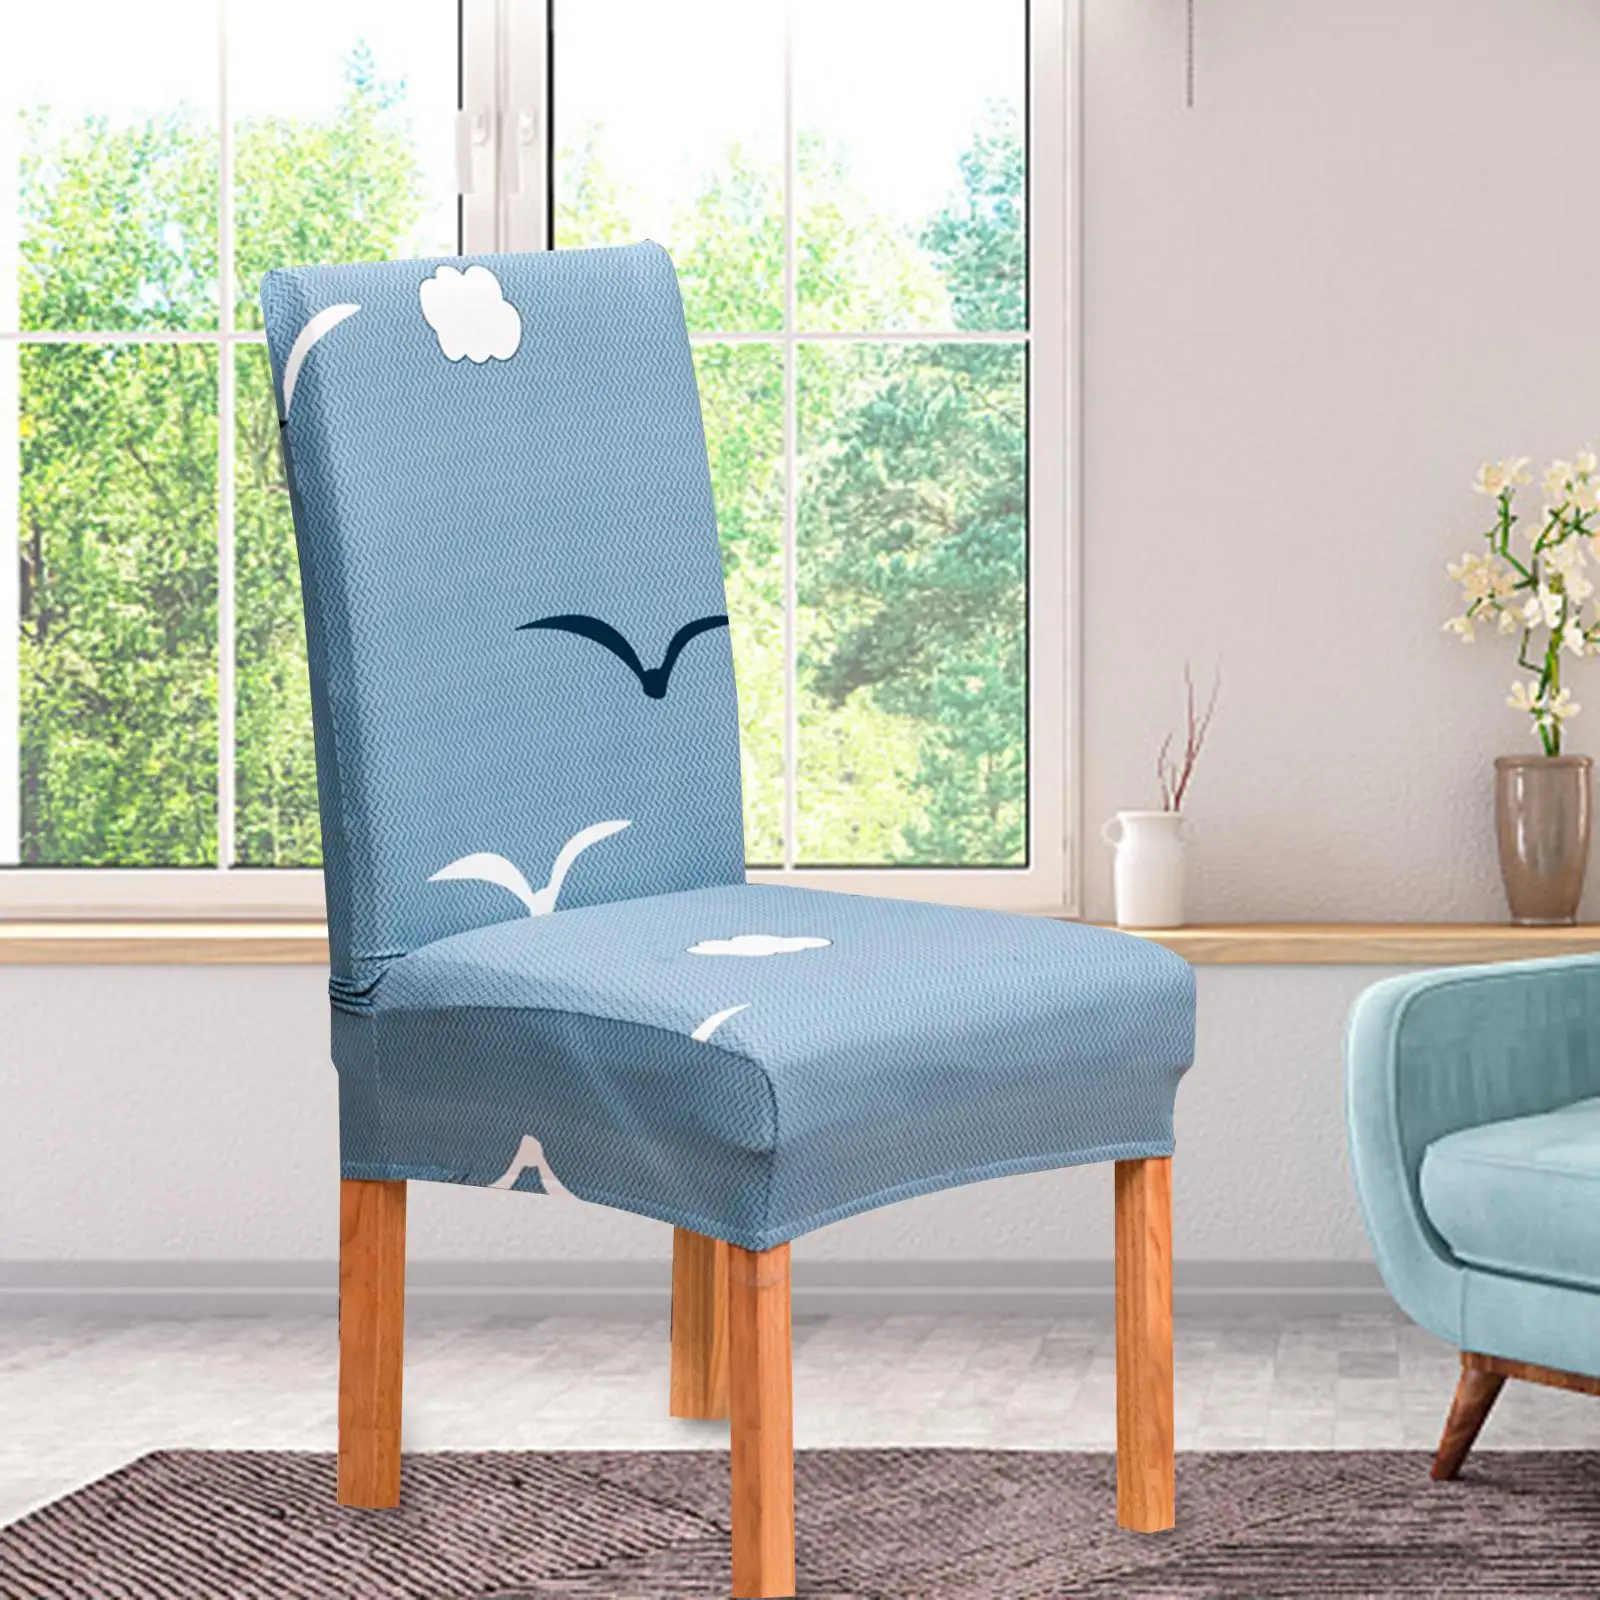 Armless Chair Slipcovers Furniture Protector Couch Cover Upholstered Removable Stretch for Bedroom Home Decoration Kitchen